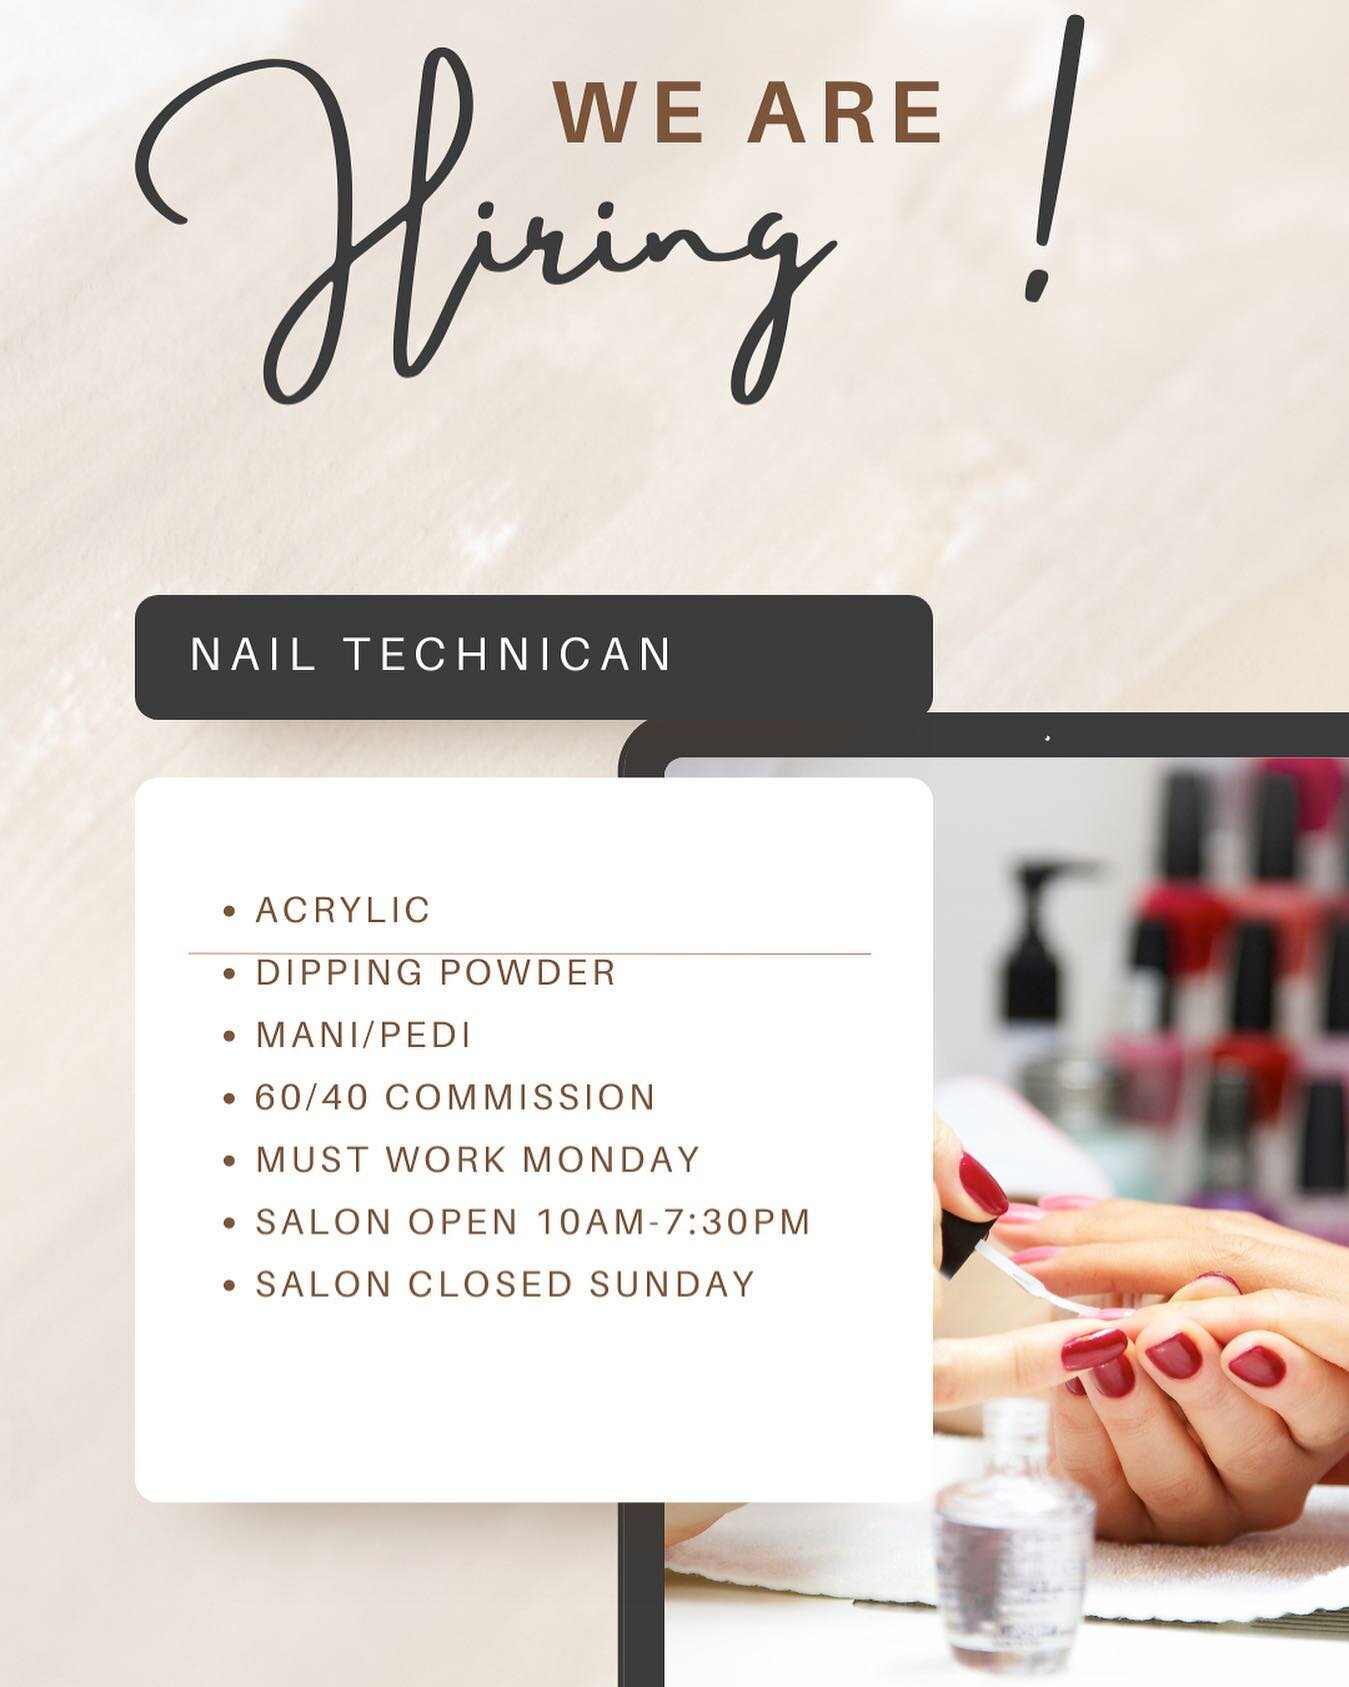 We&rsquo;re looking to add 2 more nail technicans to our team. Please call or message! 

#nailtechneeded